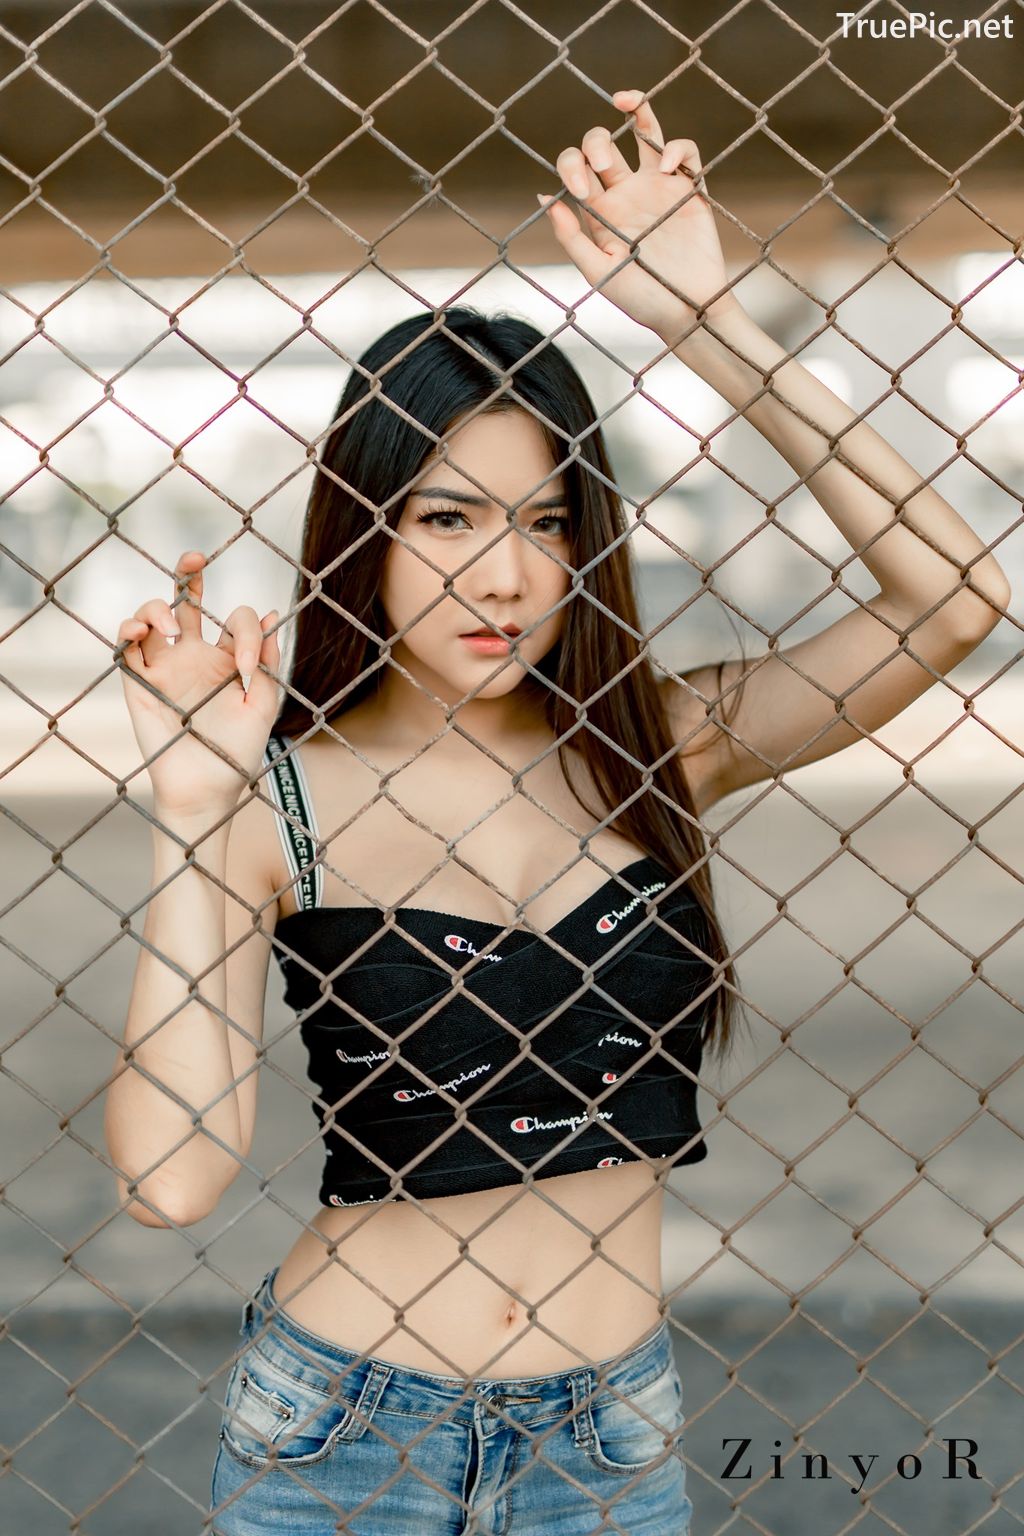 Image-Thailand-Model-Phitchamol-Srijantanet-Black-Crop-Top-and-Jean-TruePic.net- Picture-10